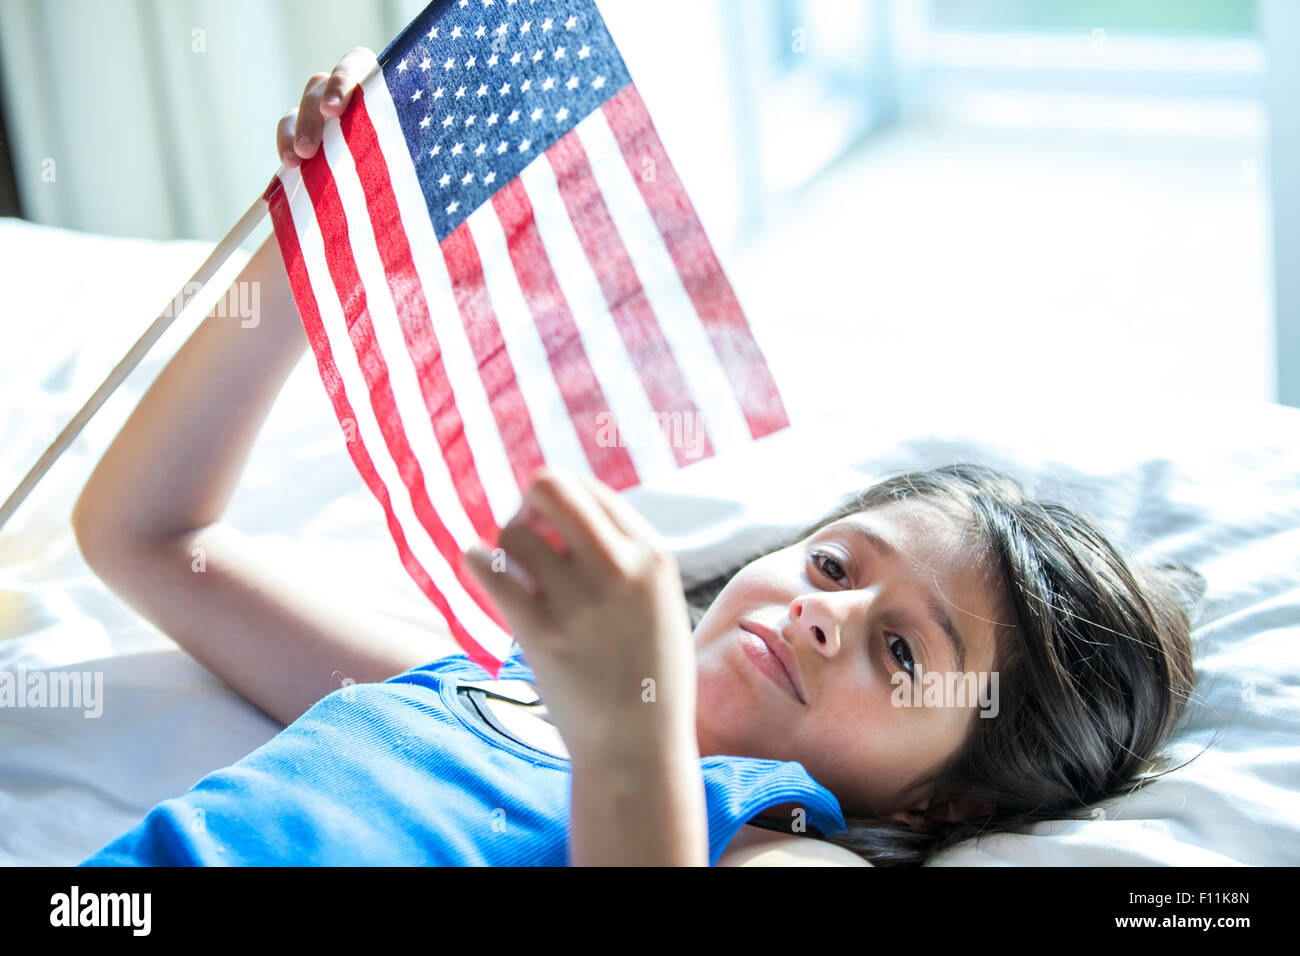 Hispanic girl holding American flag on bed Banque D'Images